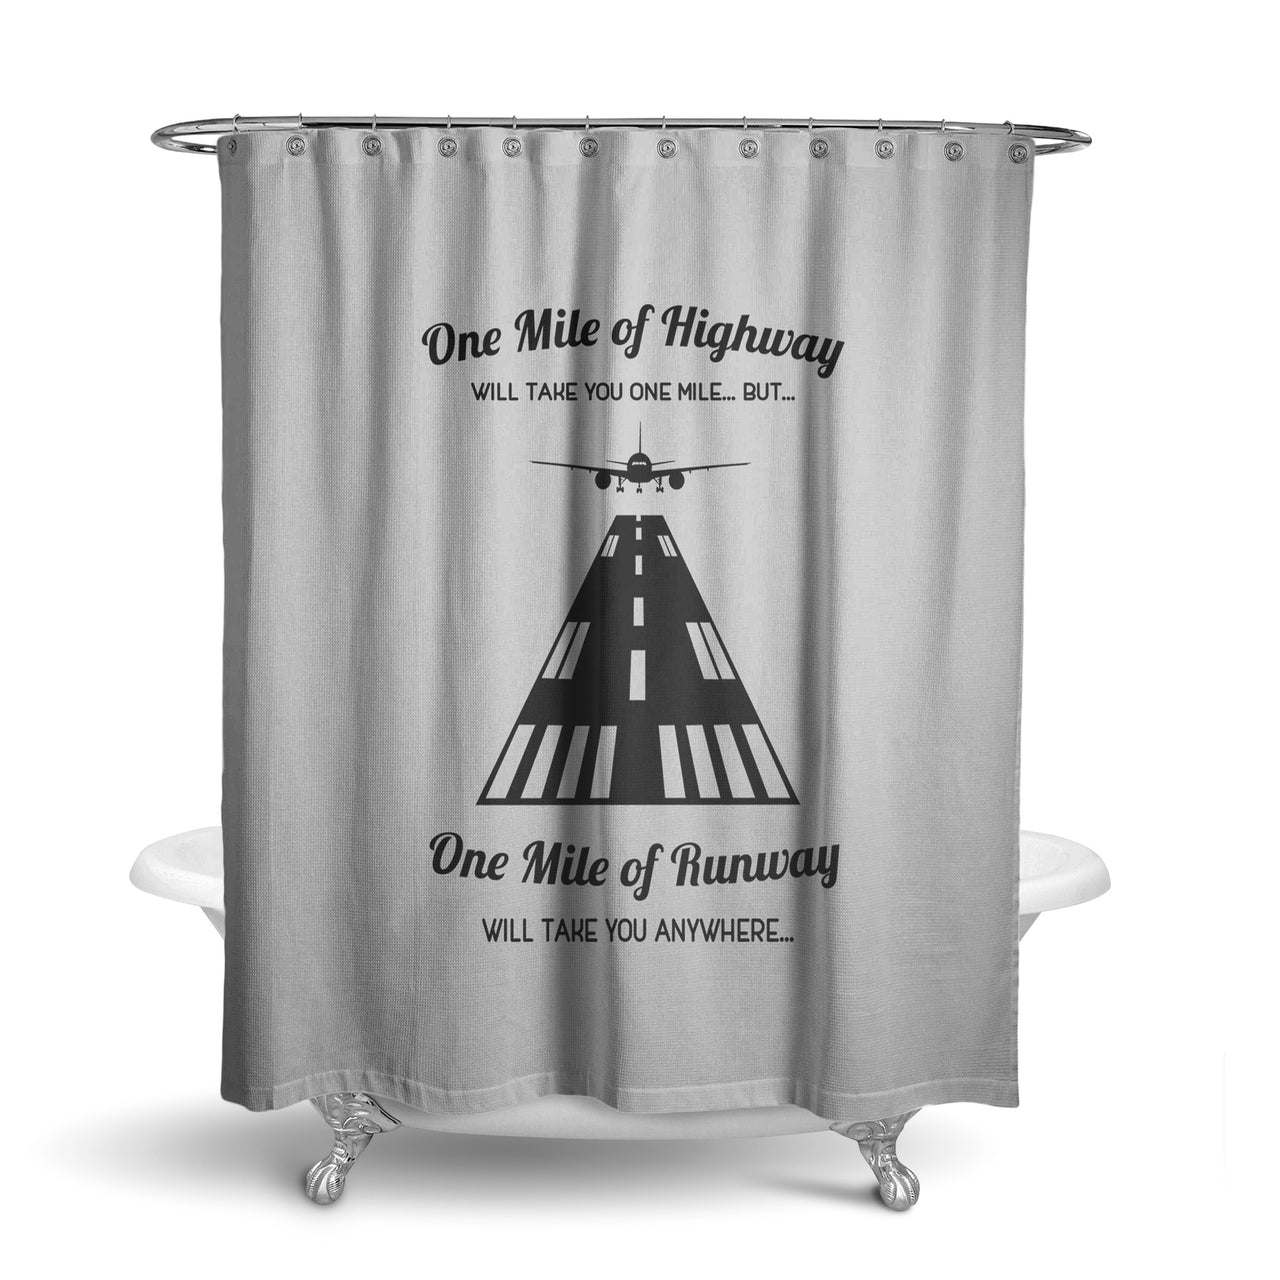 One Mile of Runway Will Take you Anywhere Designed Shower Curtains